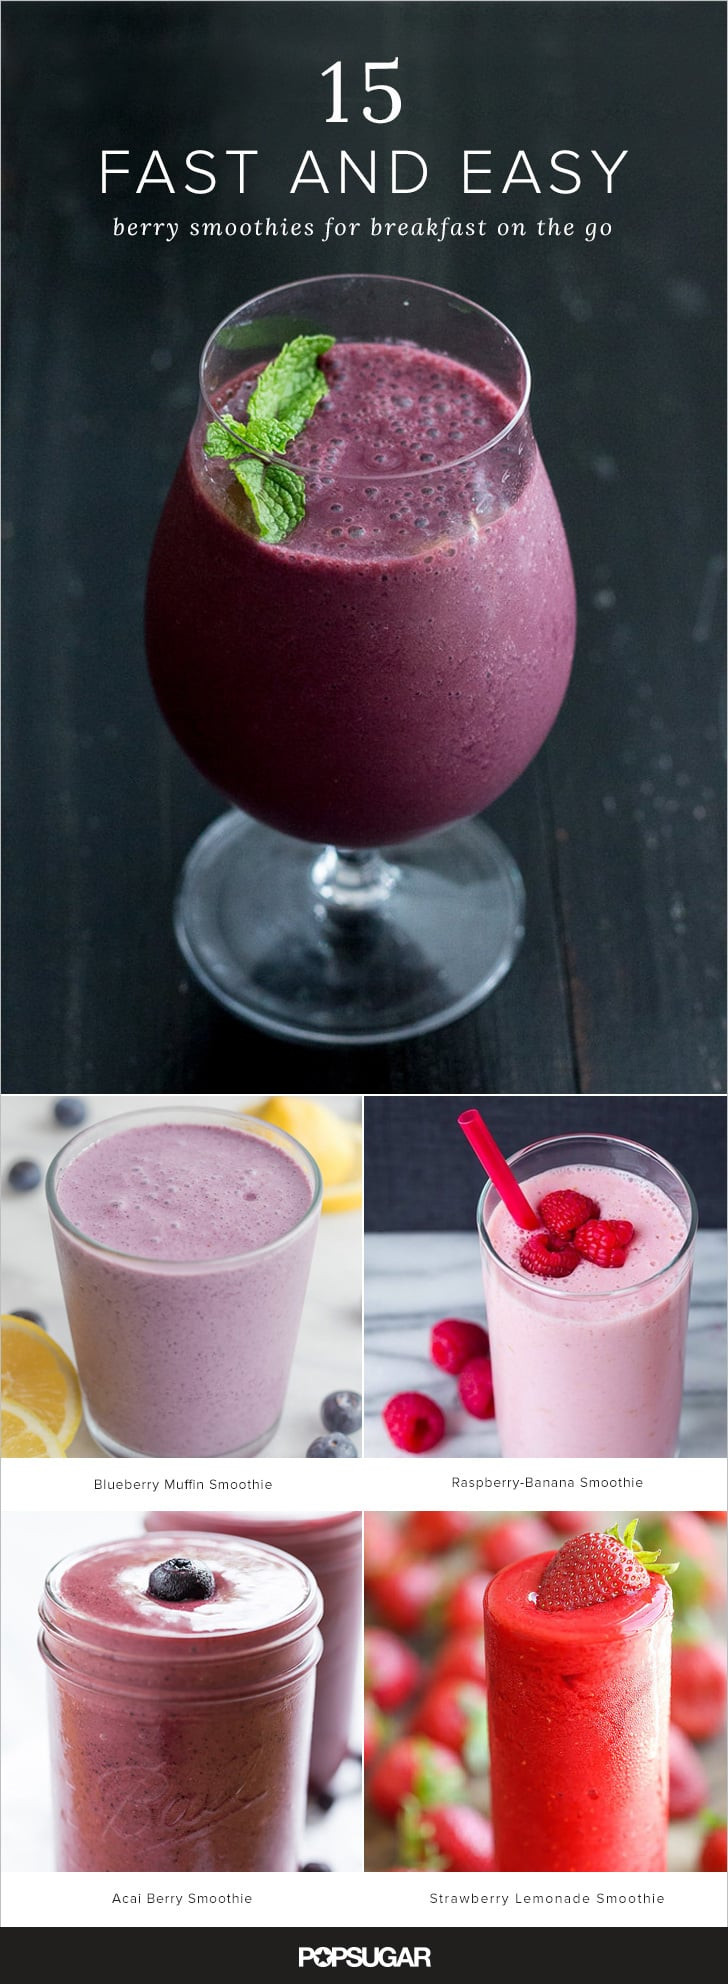 Fast Food Smoothies
 Fast and Easy Berry Smoothie Recipes